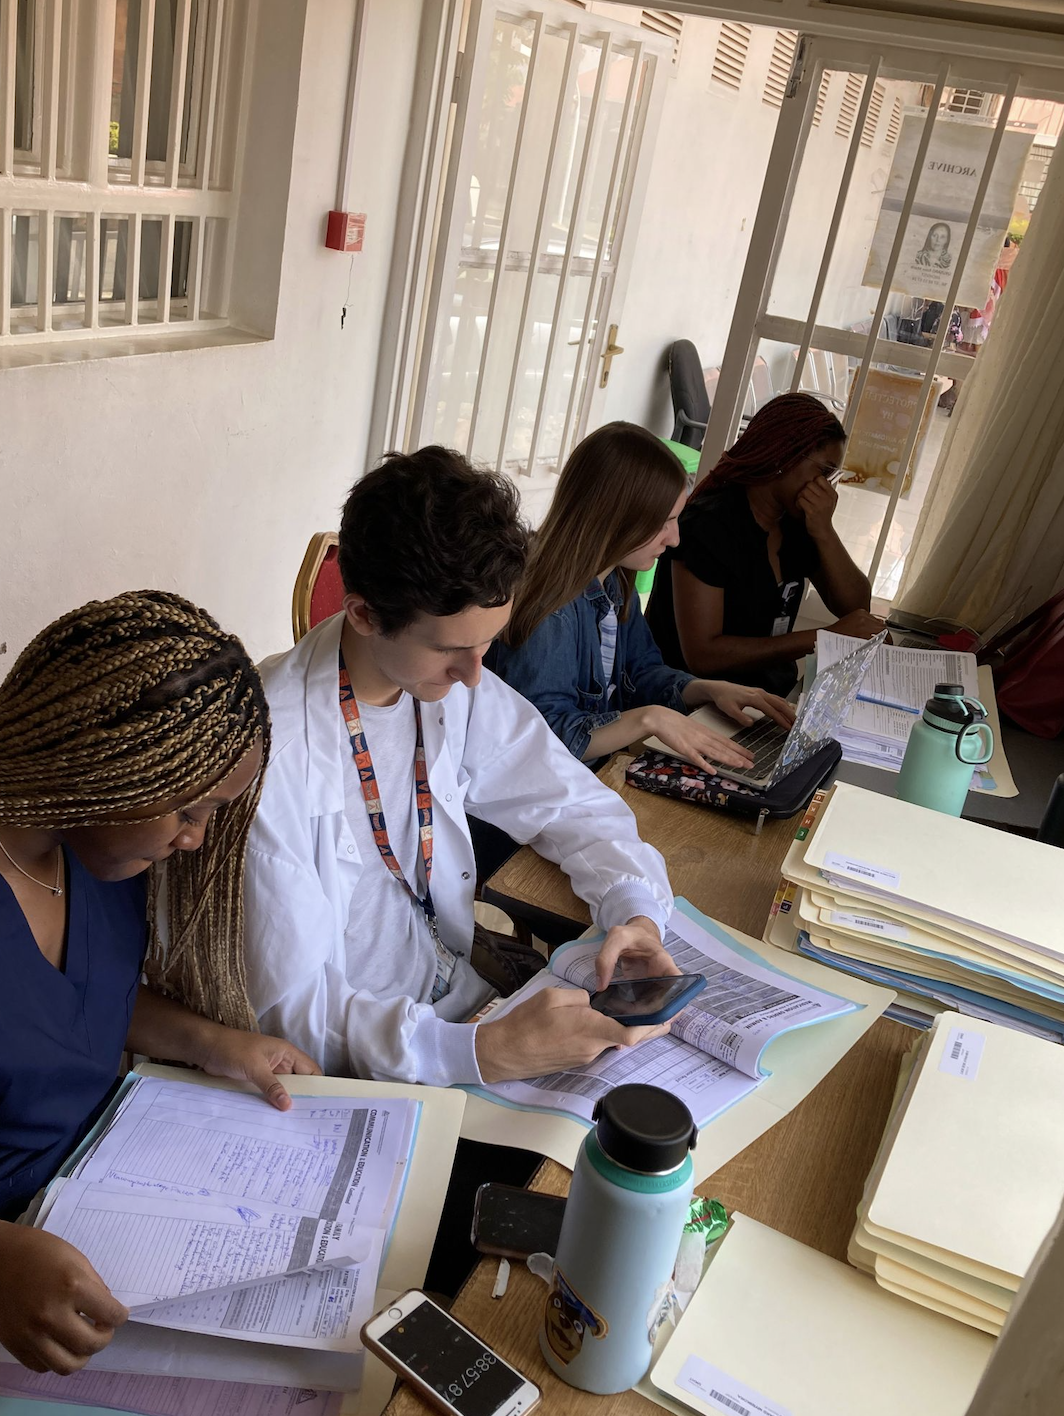 From right to left, Dazhanae Houston, Owen Selden, Shaina Twardus, and Kimberely Duru are reading patient records and evaluating where information in their surveys are located in the files at the University Teaching Hospital of Kigali’s (CHUK) medical archive. 